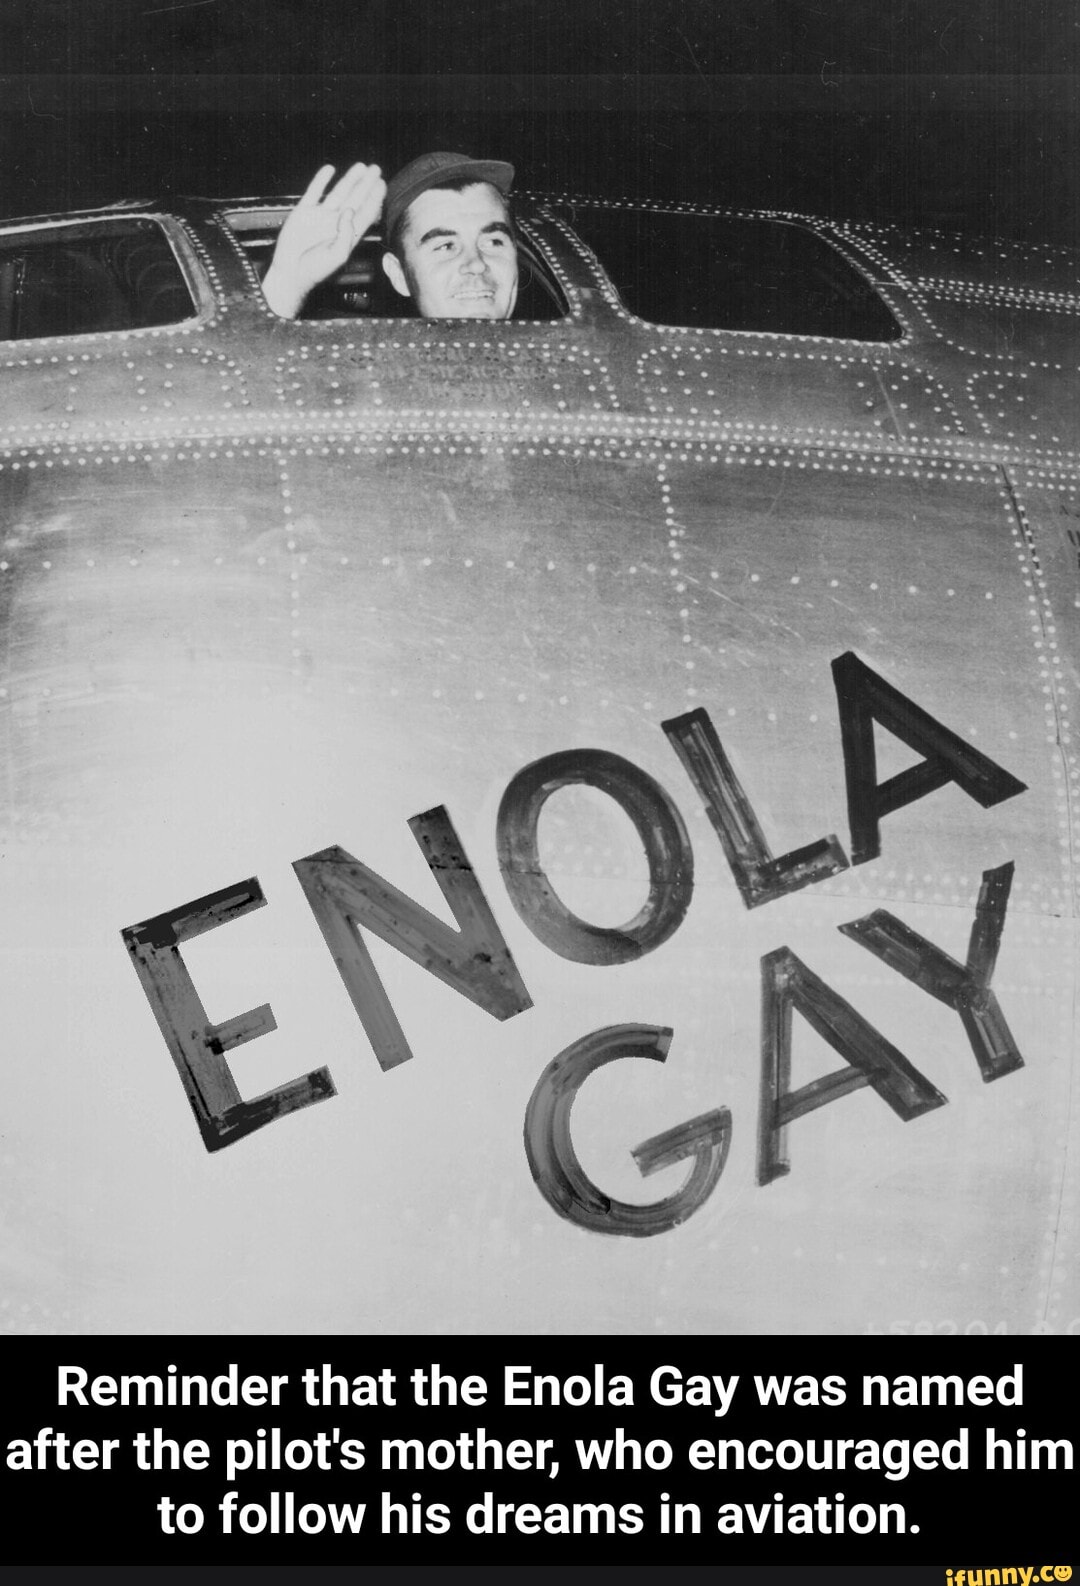 what was the enola gay named after